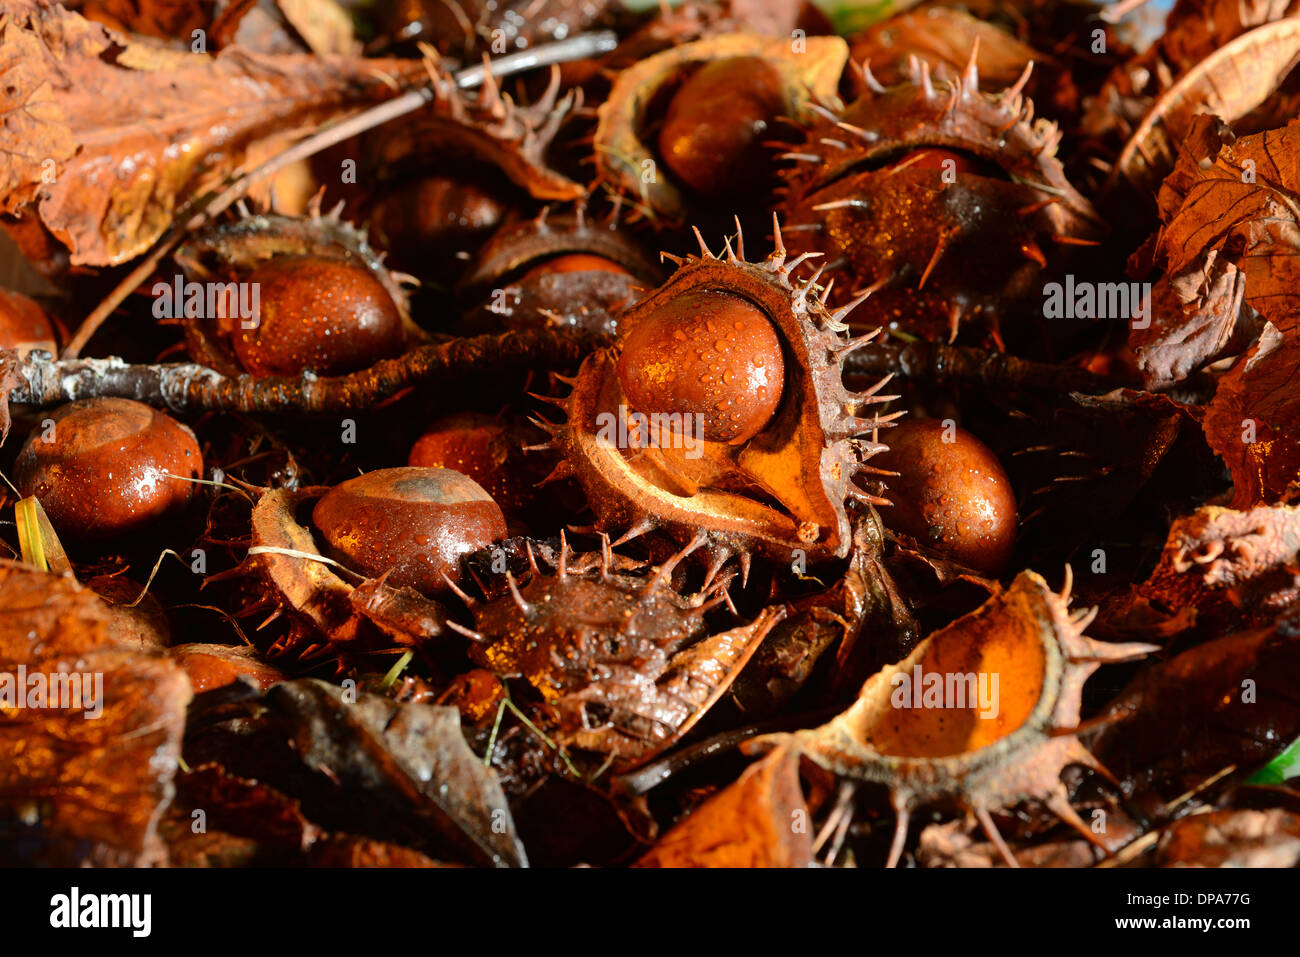 Fallen conkers from Aesculus hippocastanum (Horse Chestnut) tree laying amongst Autumn leaves Stock Photo